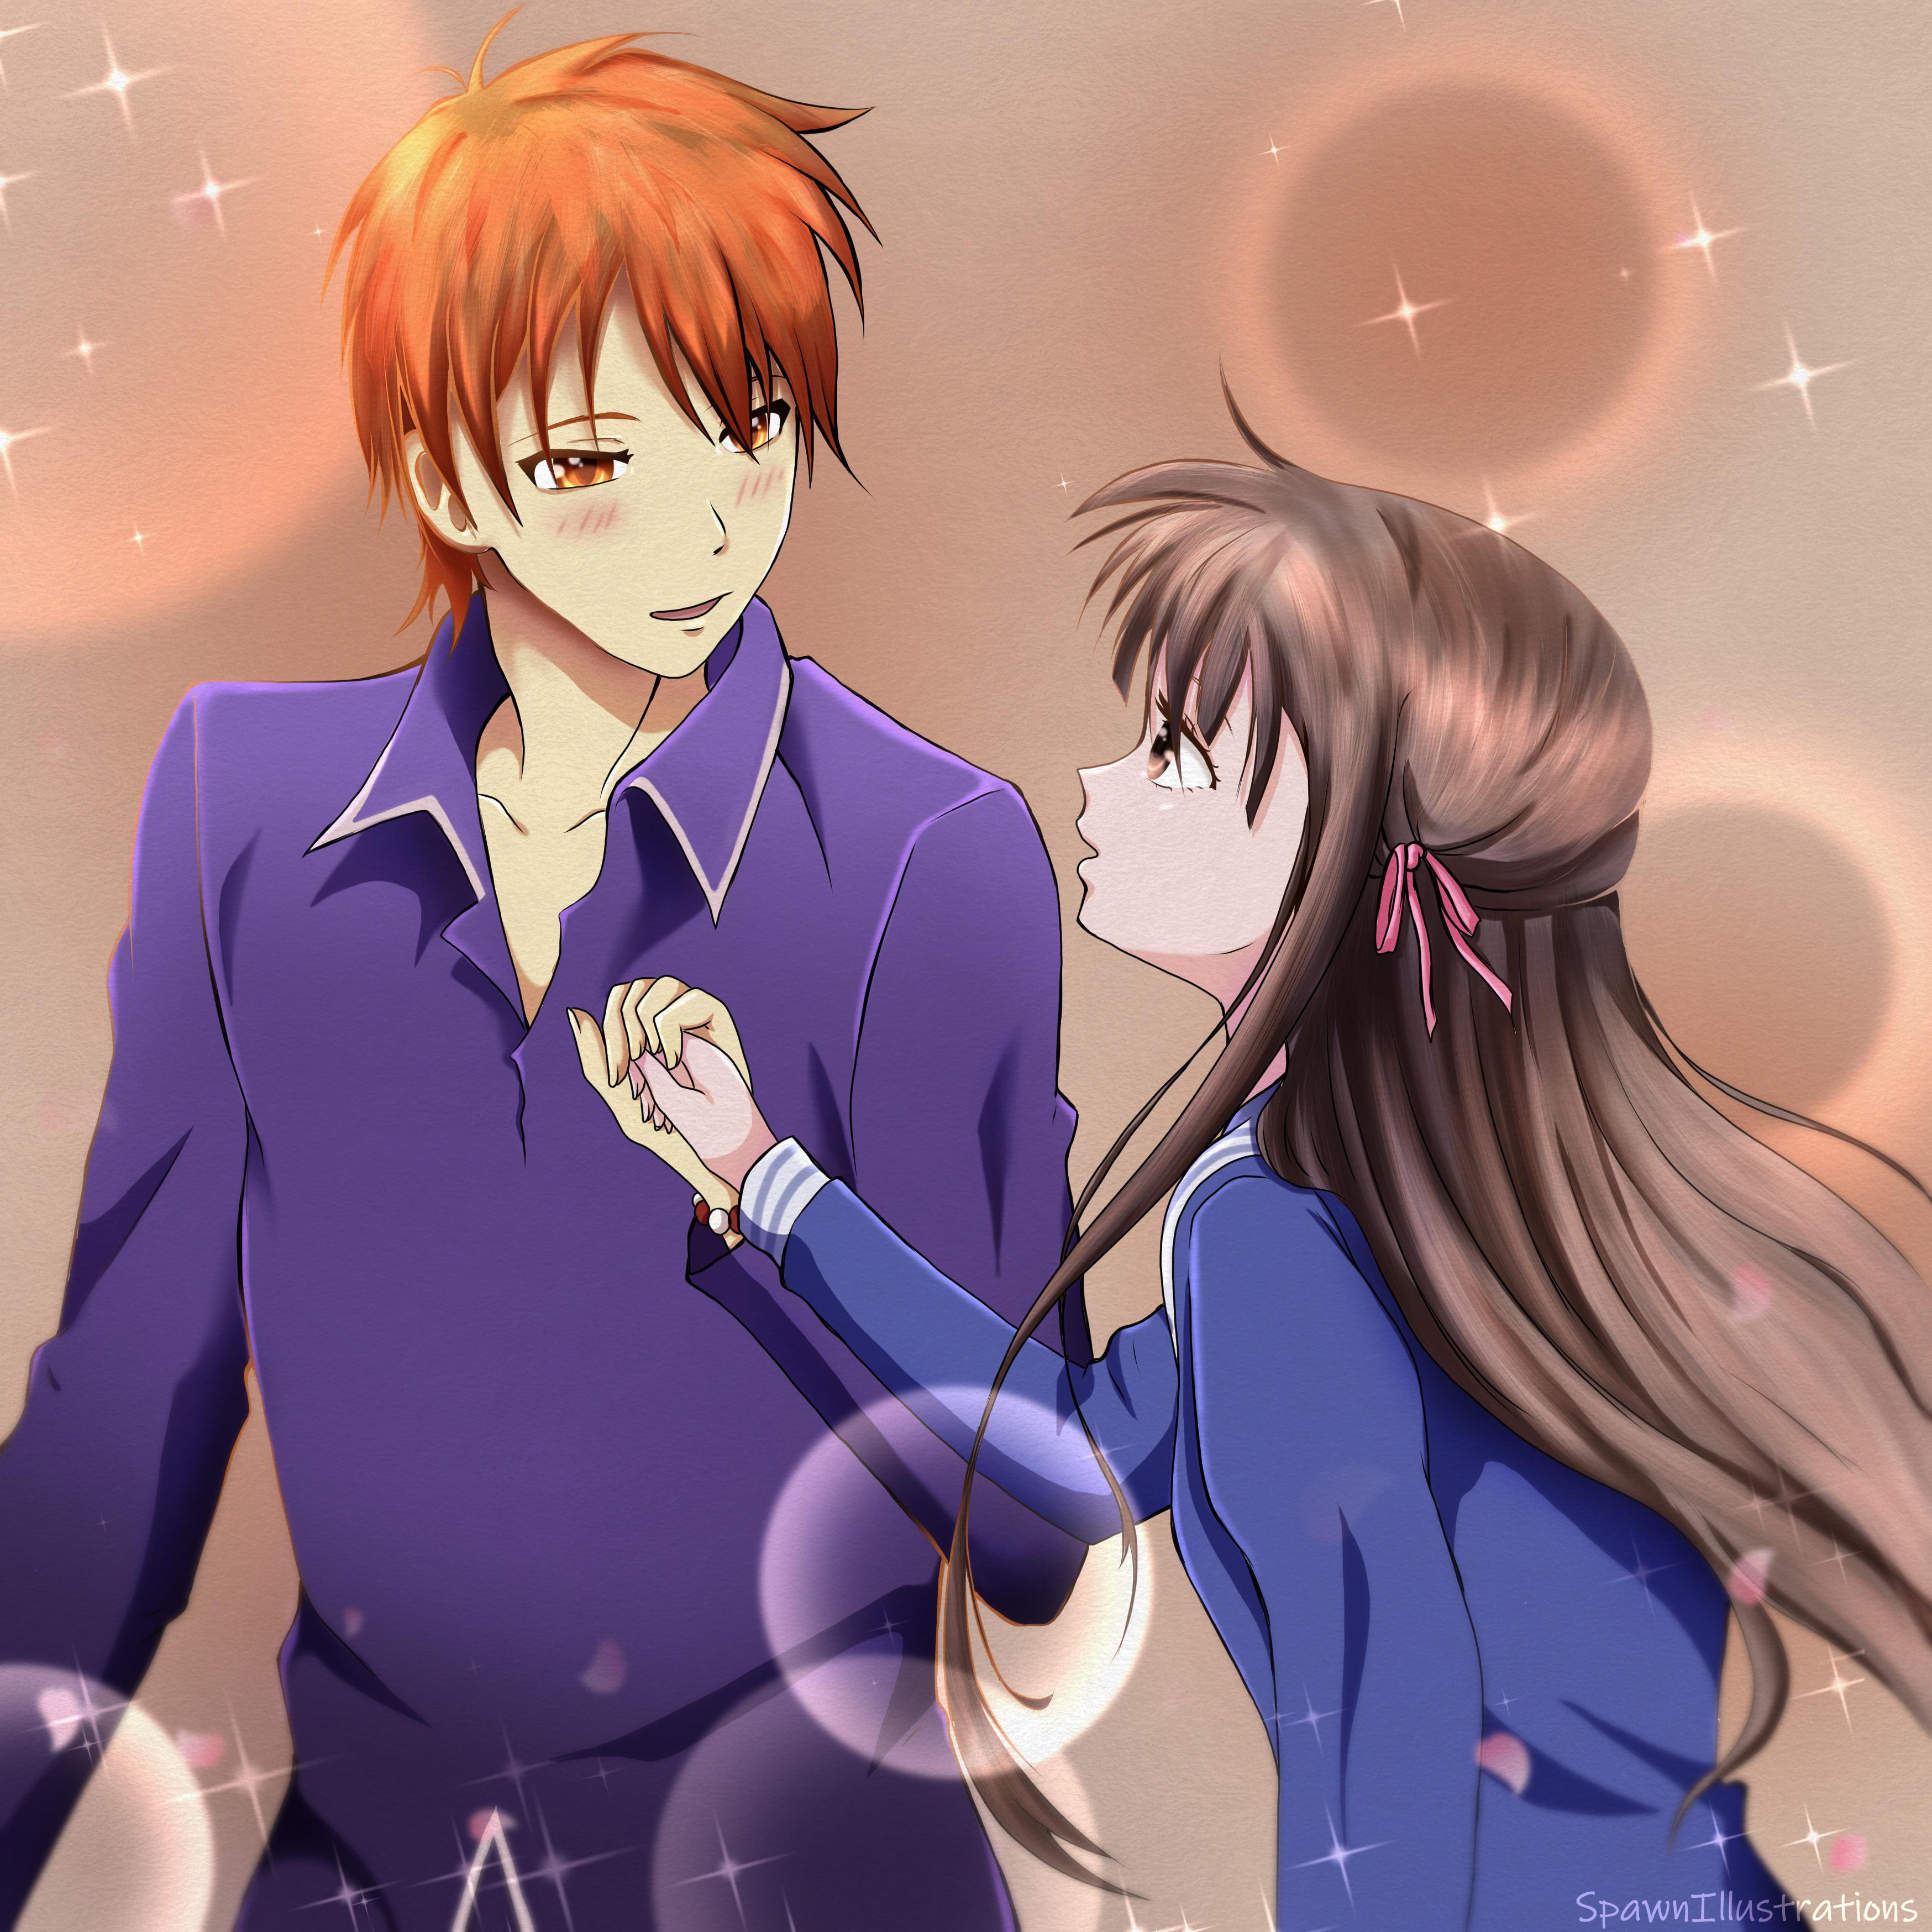 Kyo and Tohru Wallpapers - Top Free Kyo and Tohru Backgrounds ...